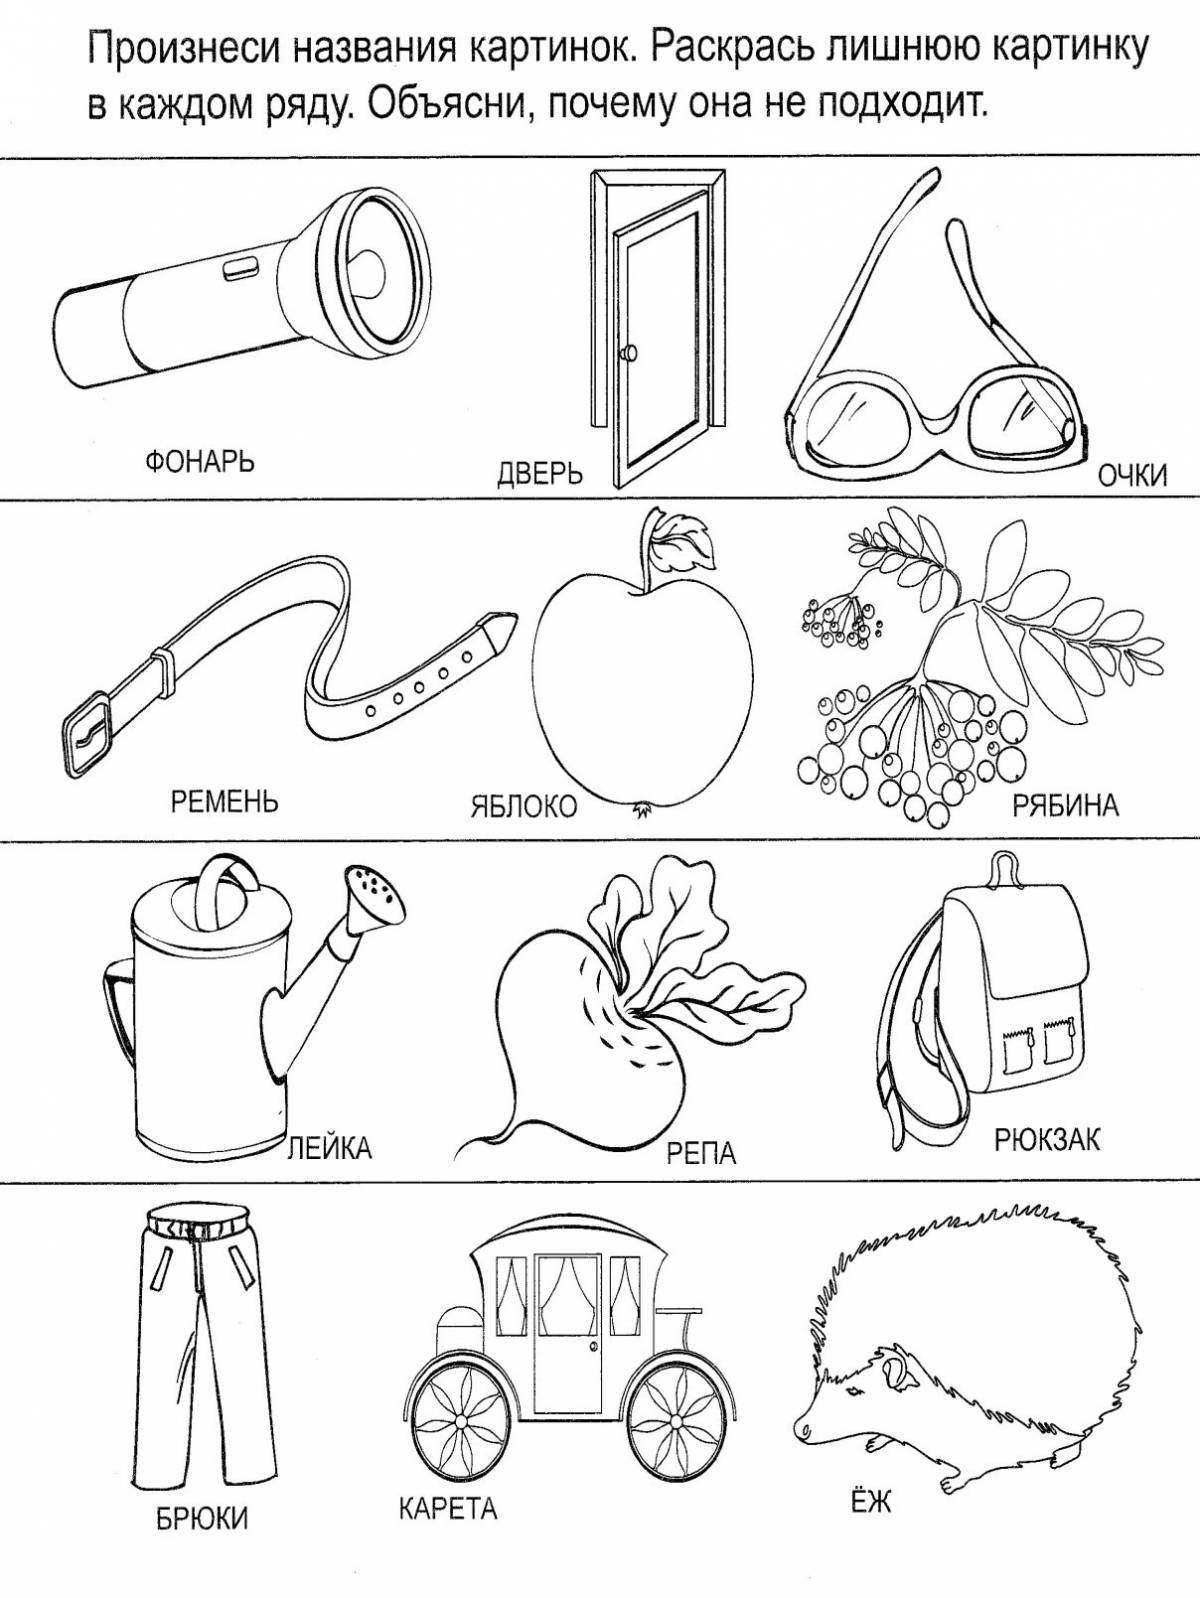 Attractive r-driven coloring page for speech therapy